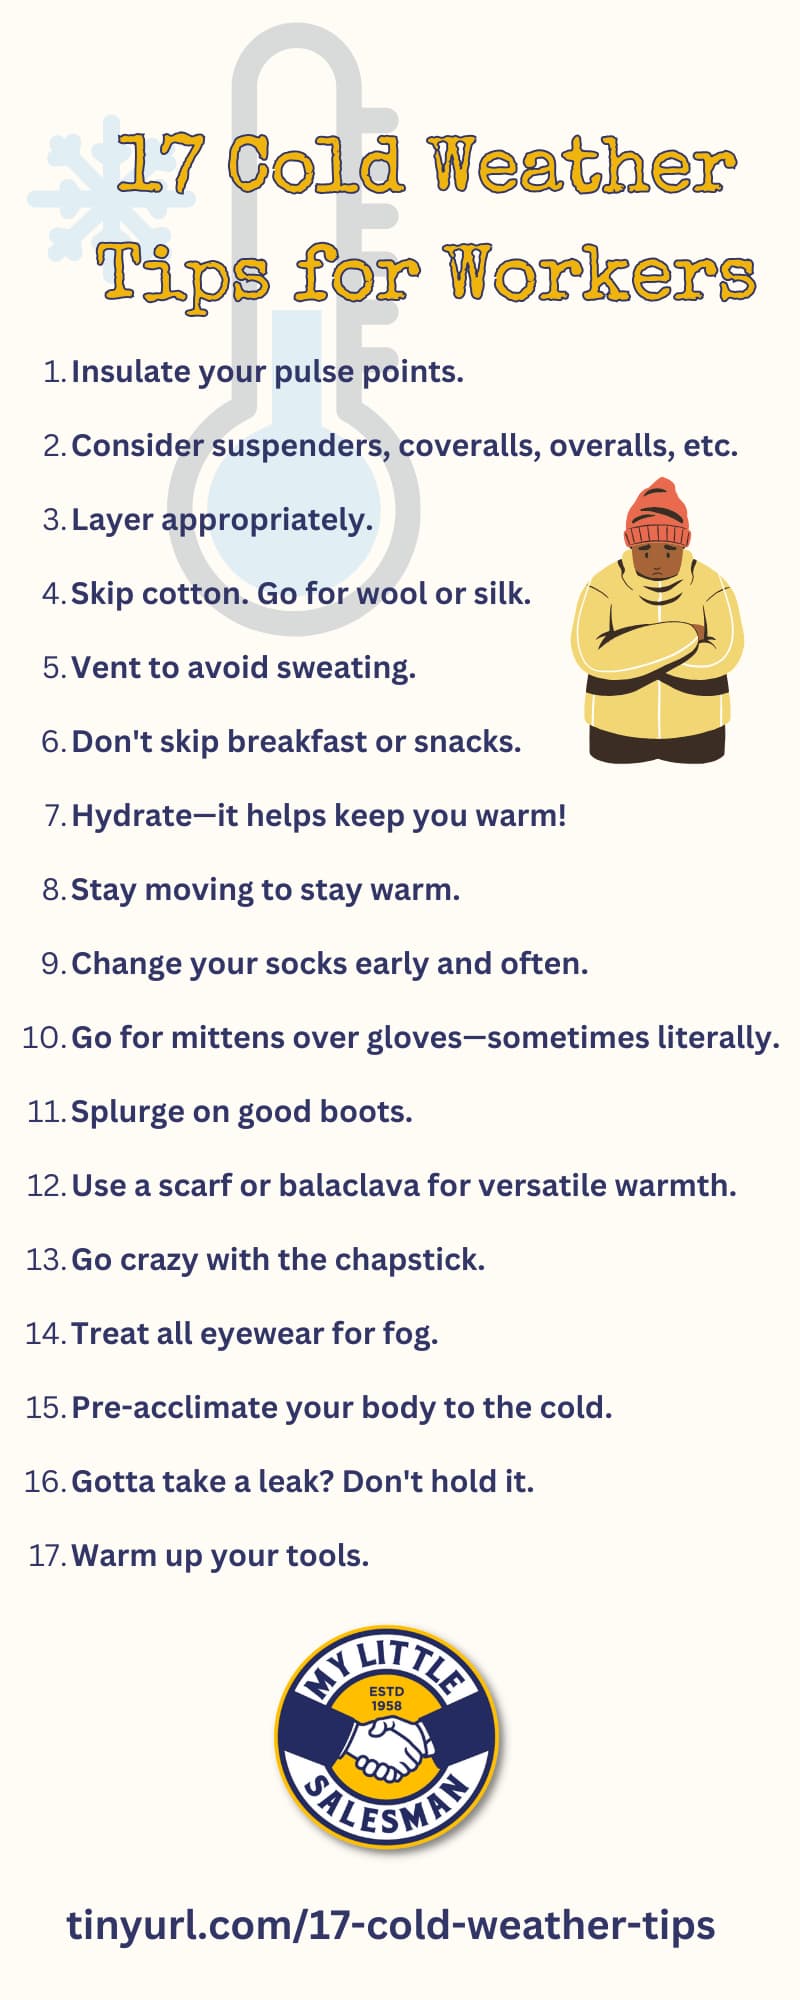 cold weather tips for workers infographic